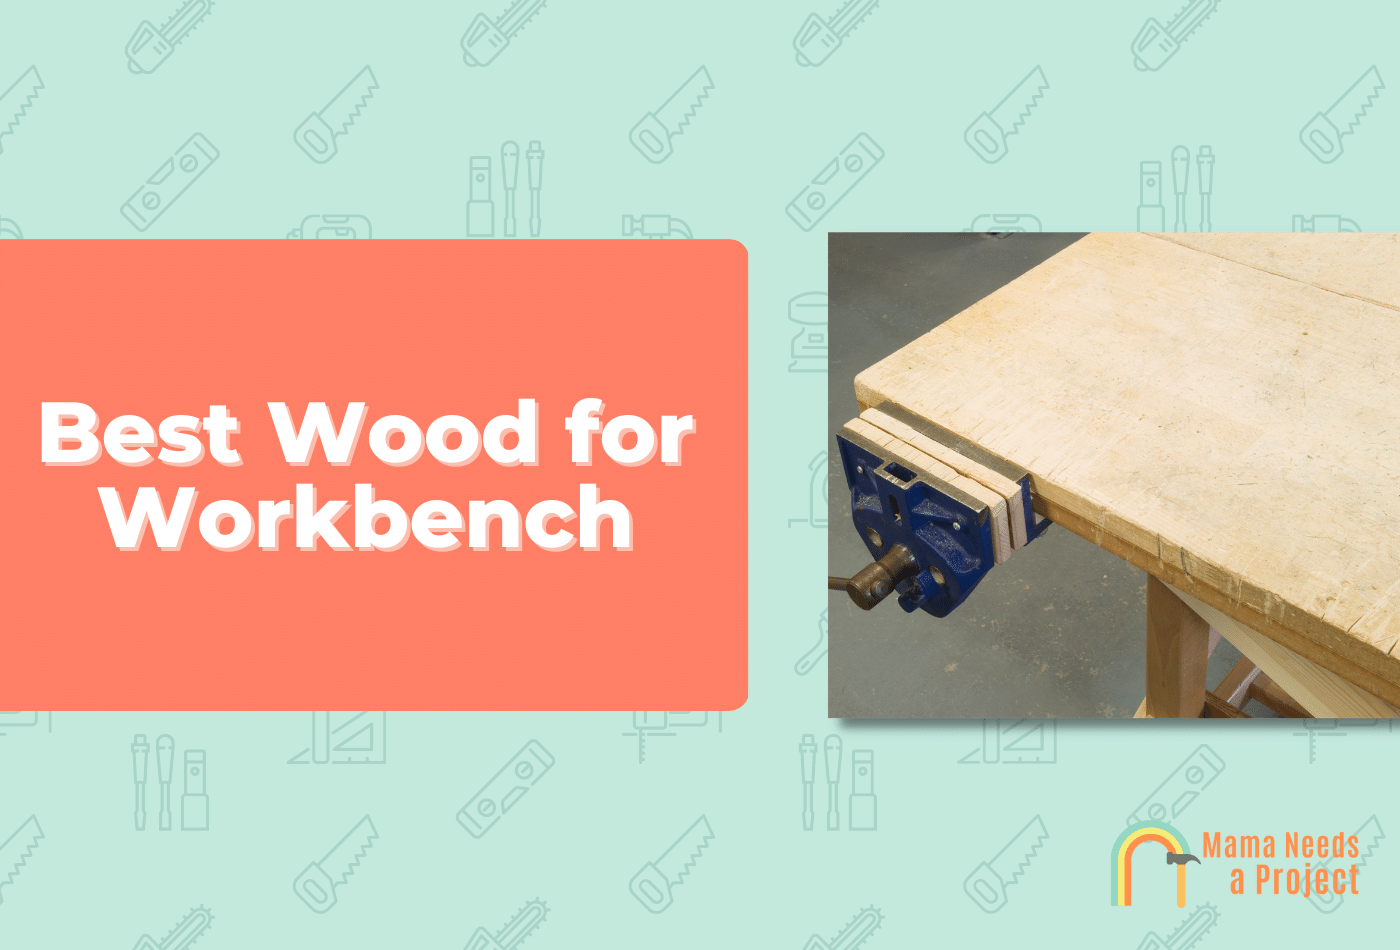 Best Wood for Workbench